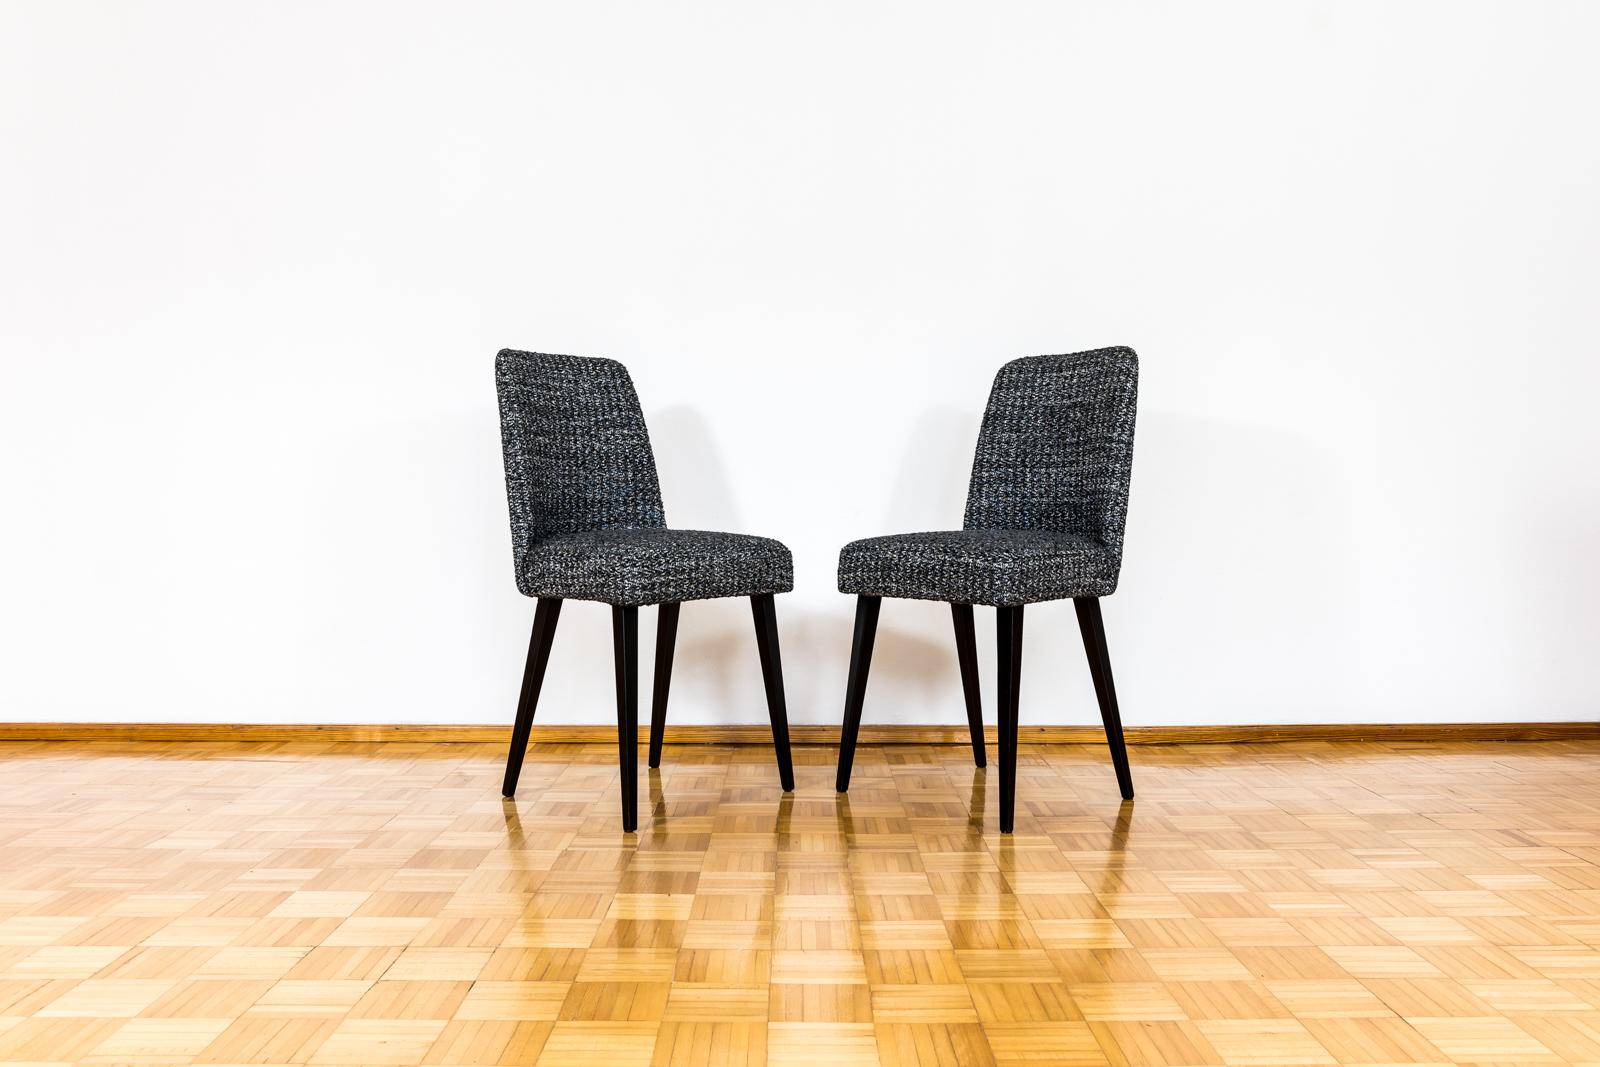 Polish Set Of 6 Black Chairs, 1960s, Poland For Sale